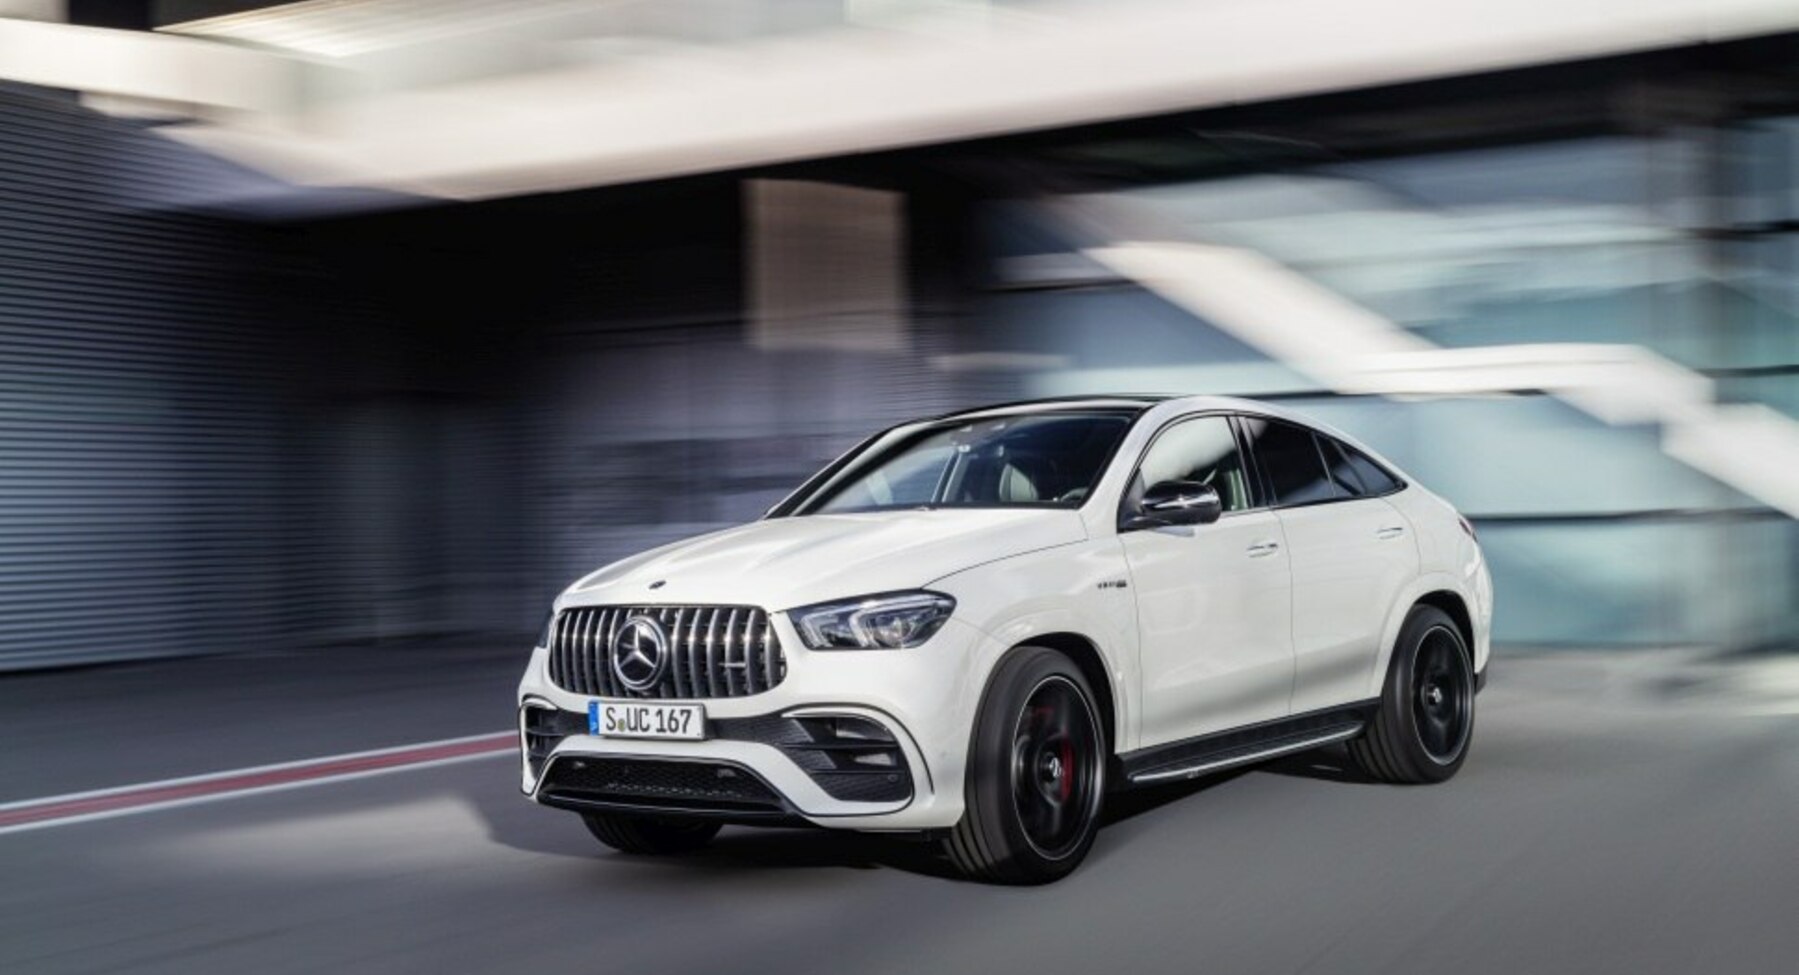 Mercedes-Benz GLE Coupe (C167) GLE 400d (330 Hp) 4MATIC 9G-TRONIC 2020, 2021, 2022